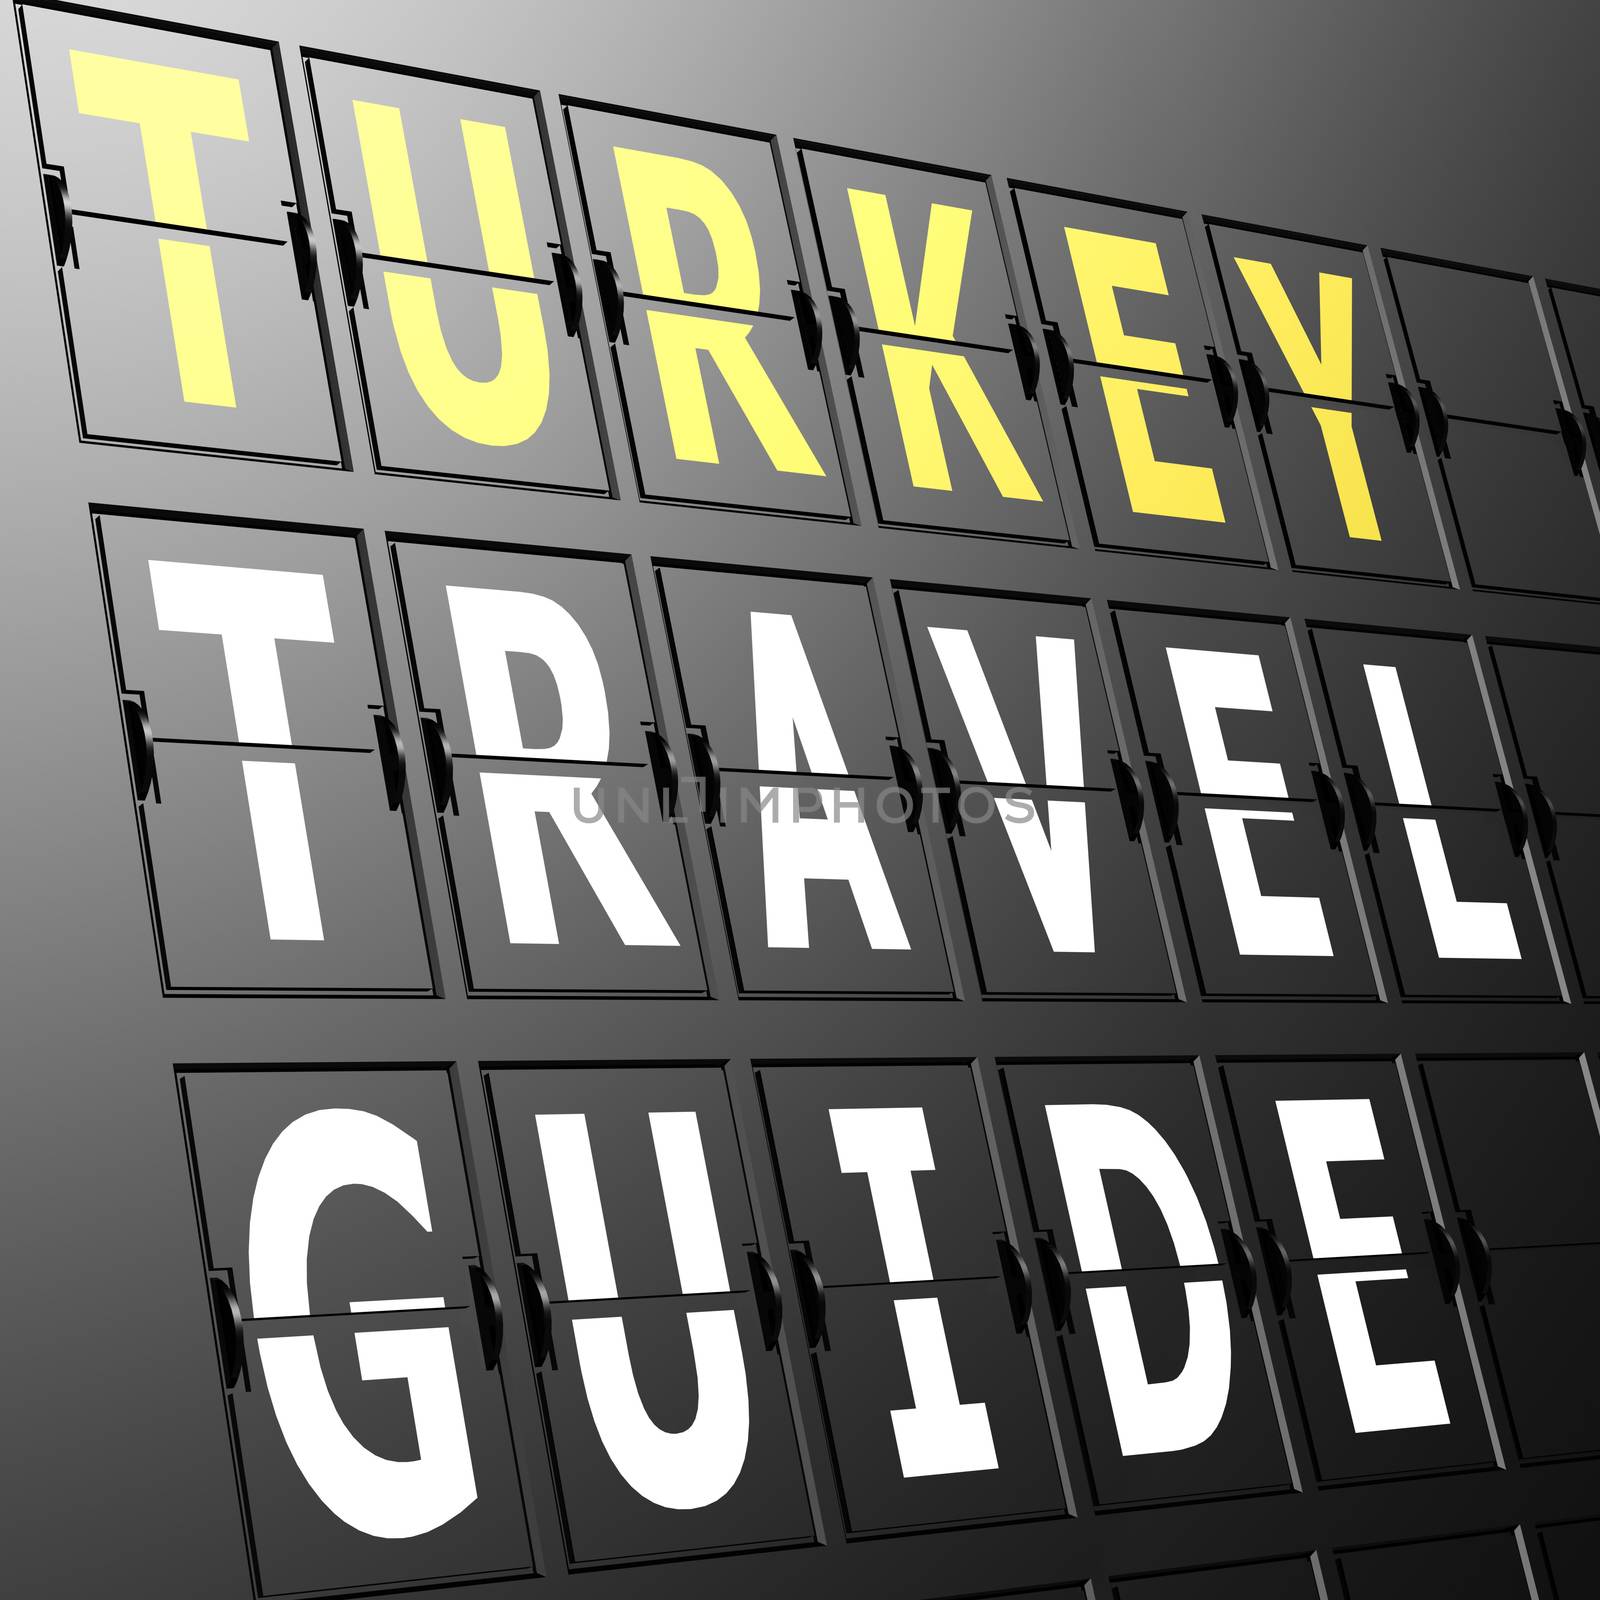 Airport display Turkey travel guide by tang90246